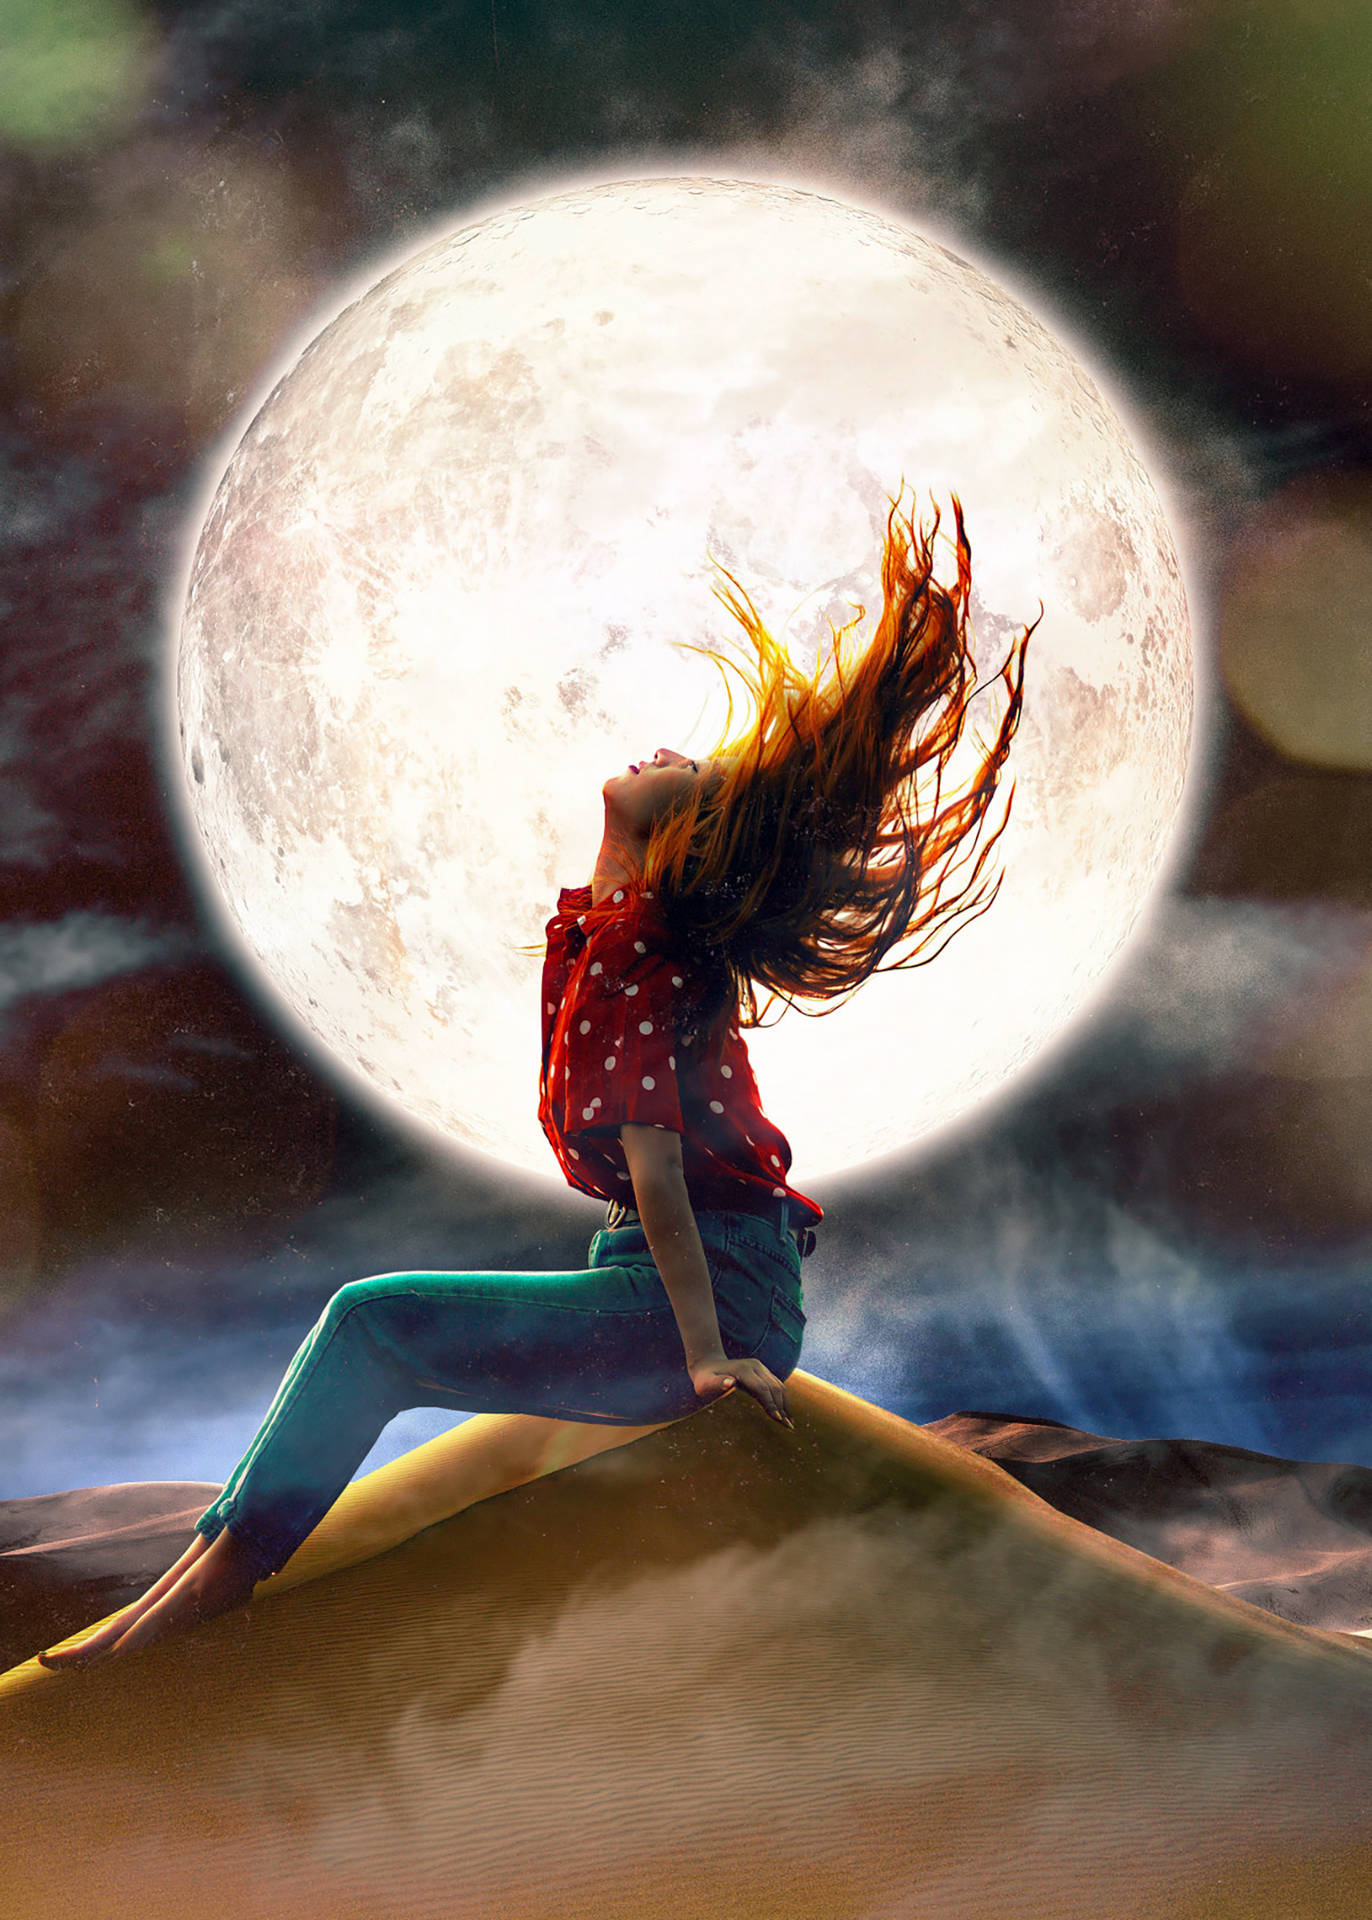 Ethereal Radiance Of Soul: Woman Embracing Freedom Under The Moonlight